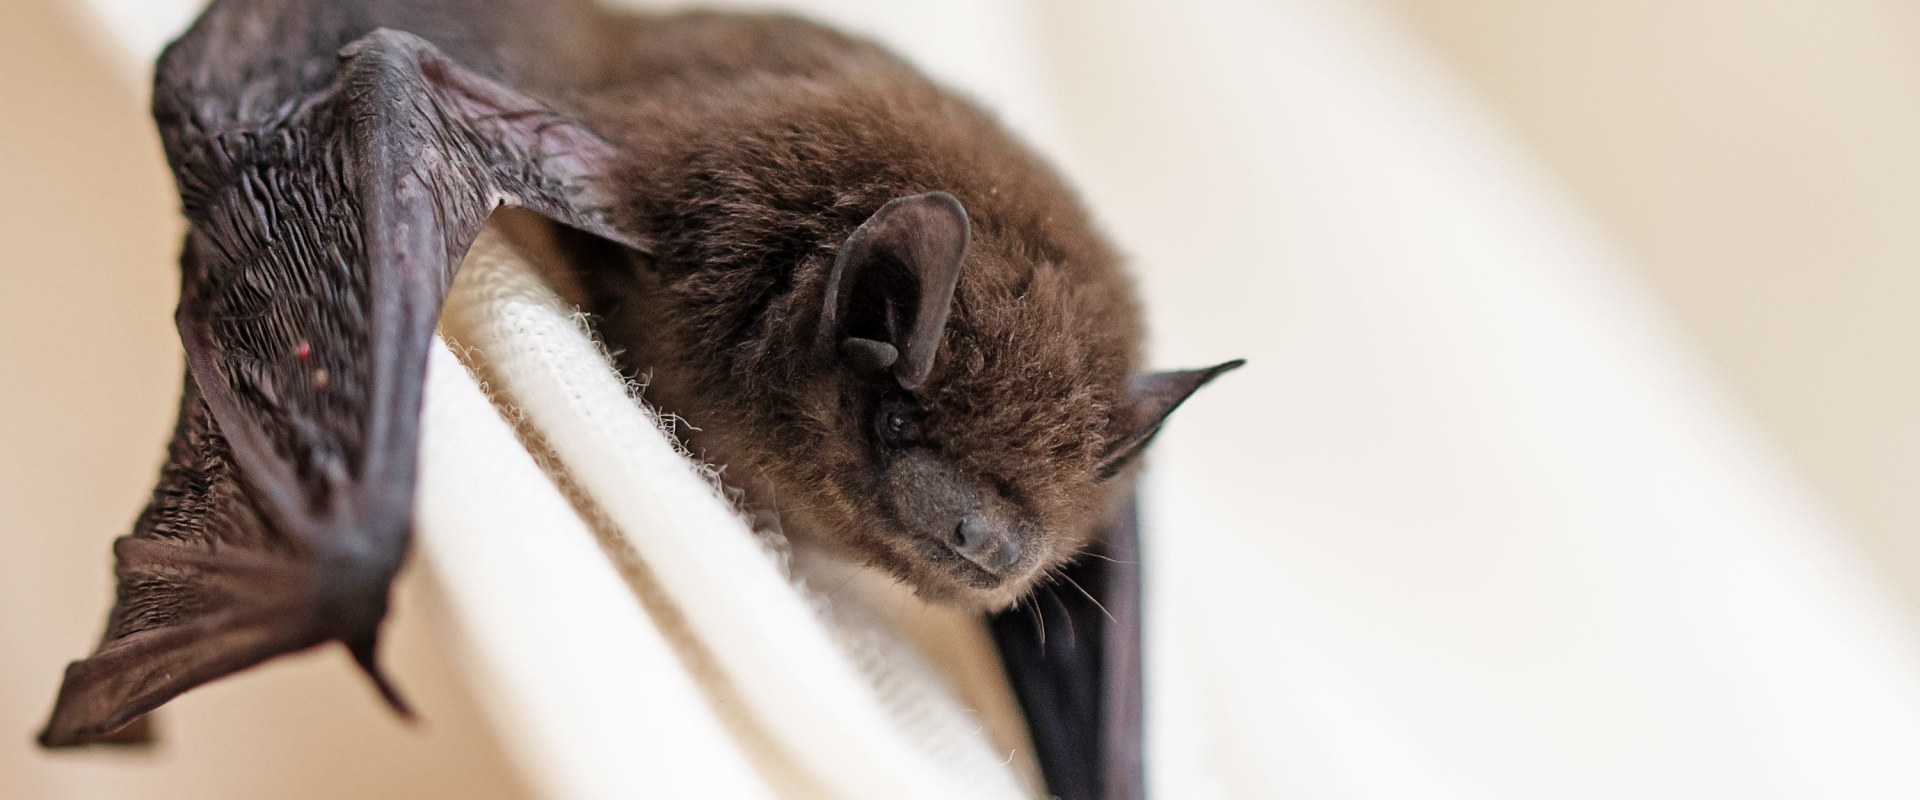 Do bats come back to the same place?